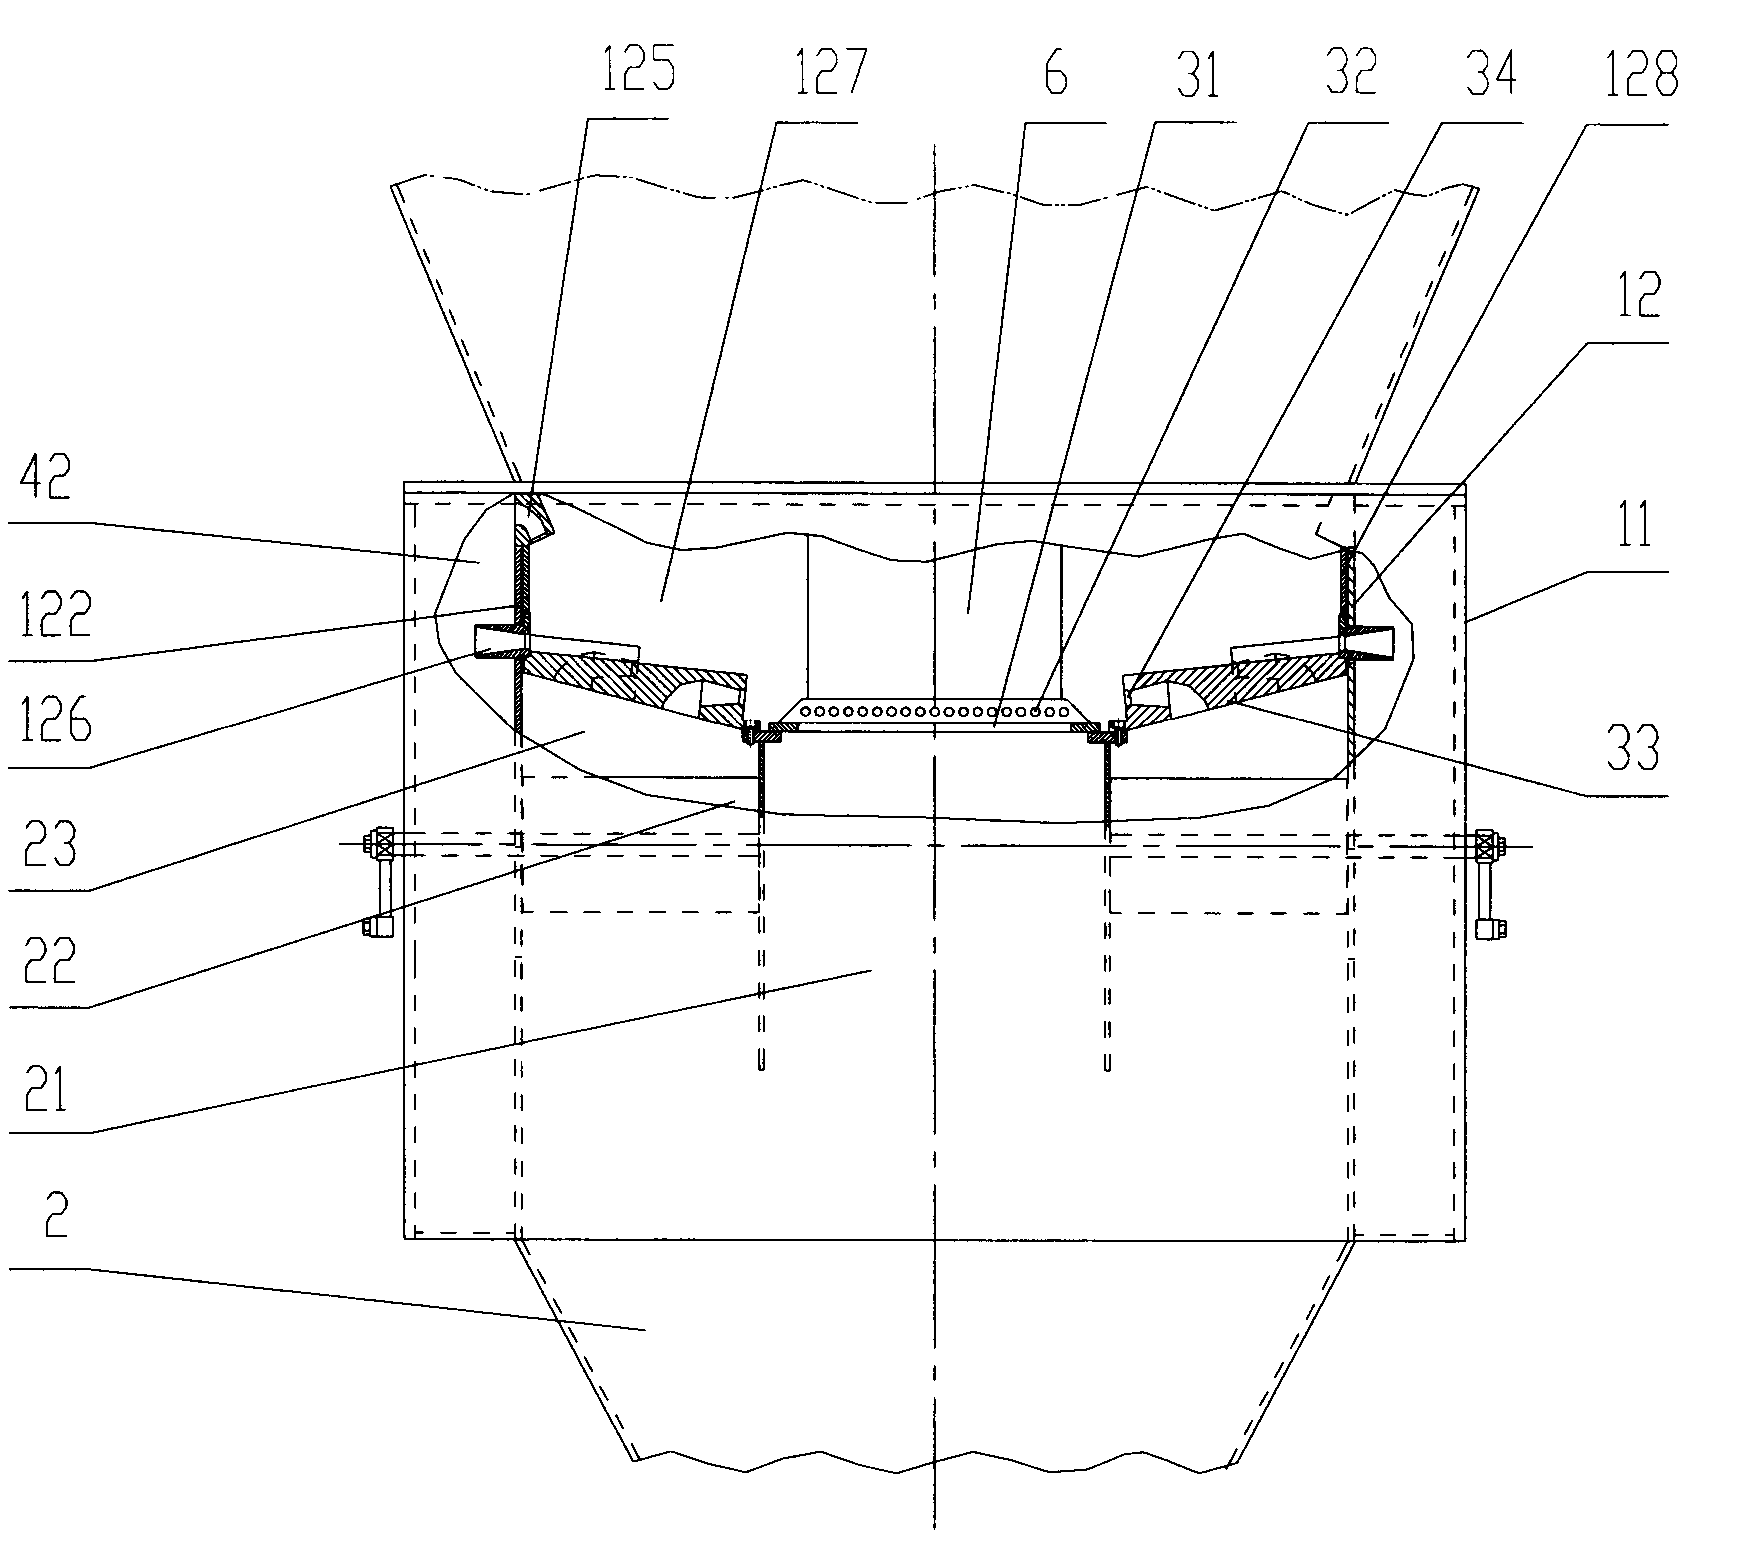 Body structure of boiling rotating fluidized bed